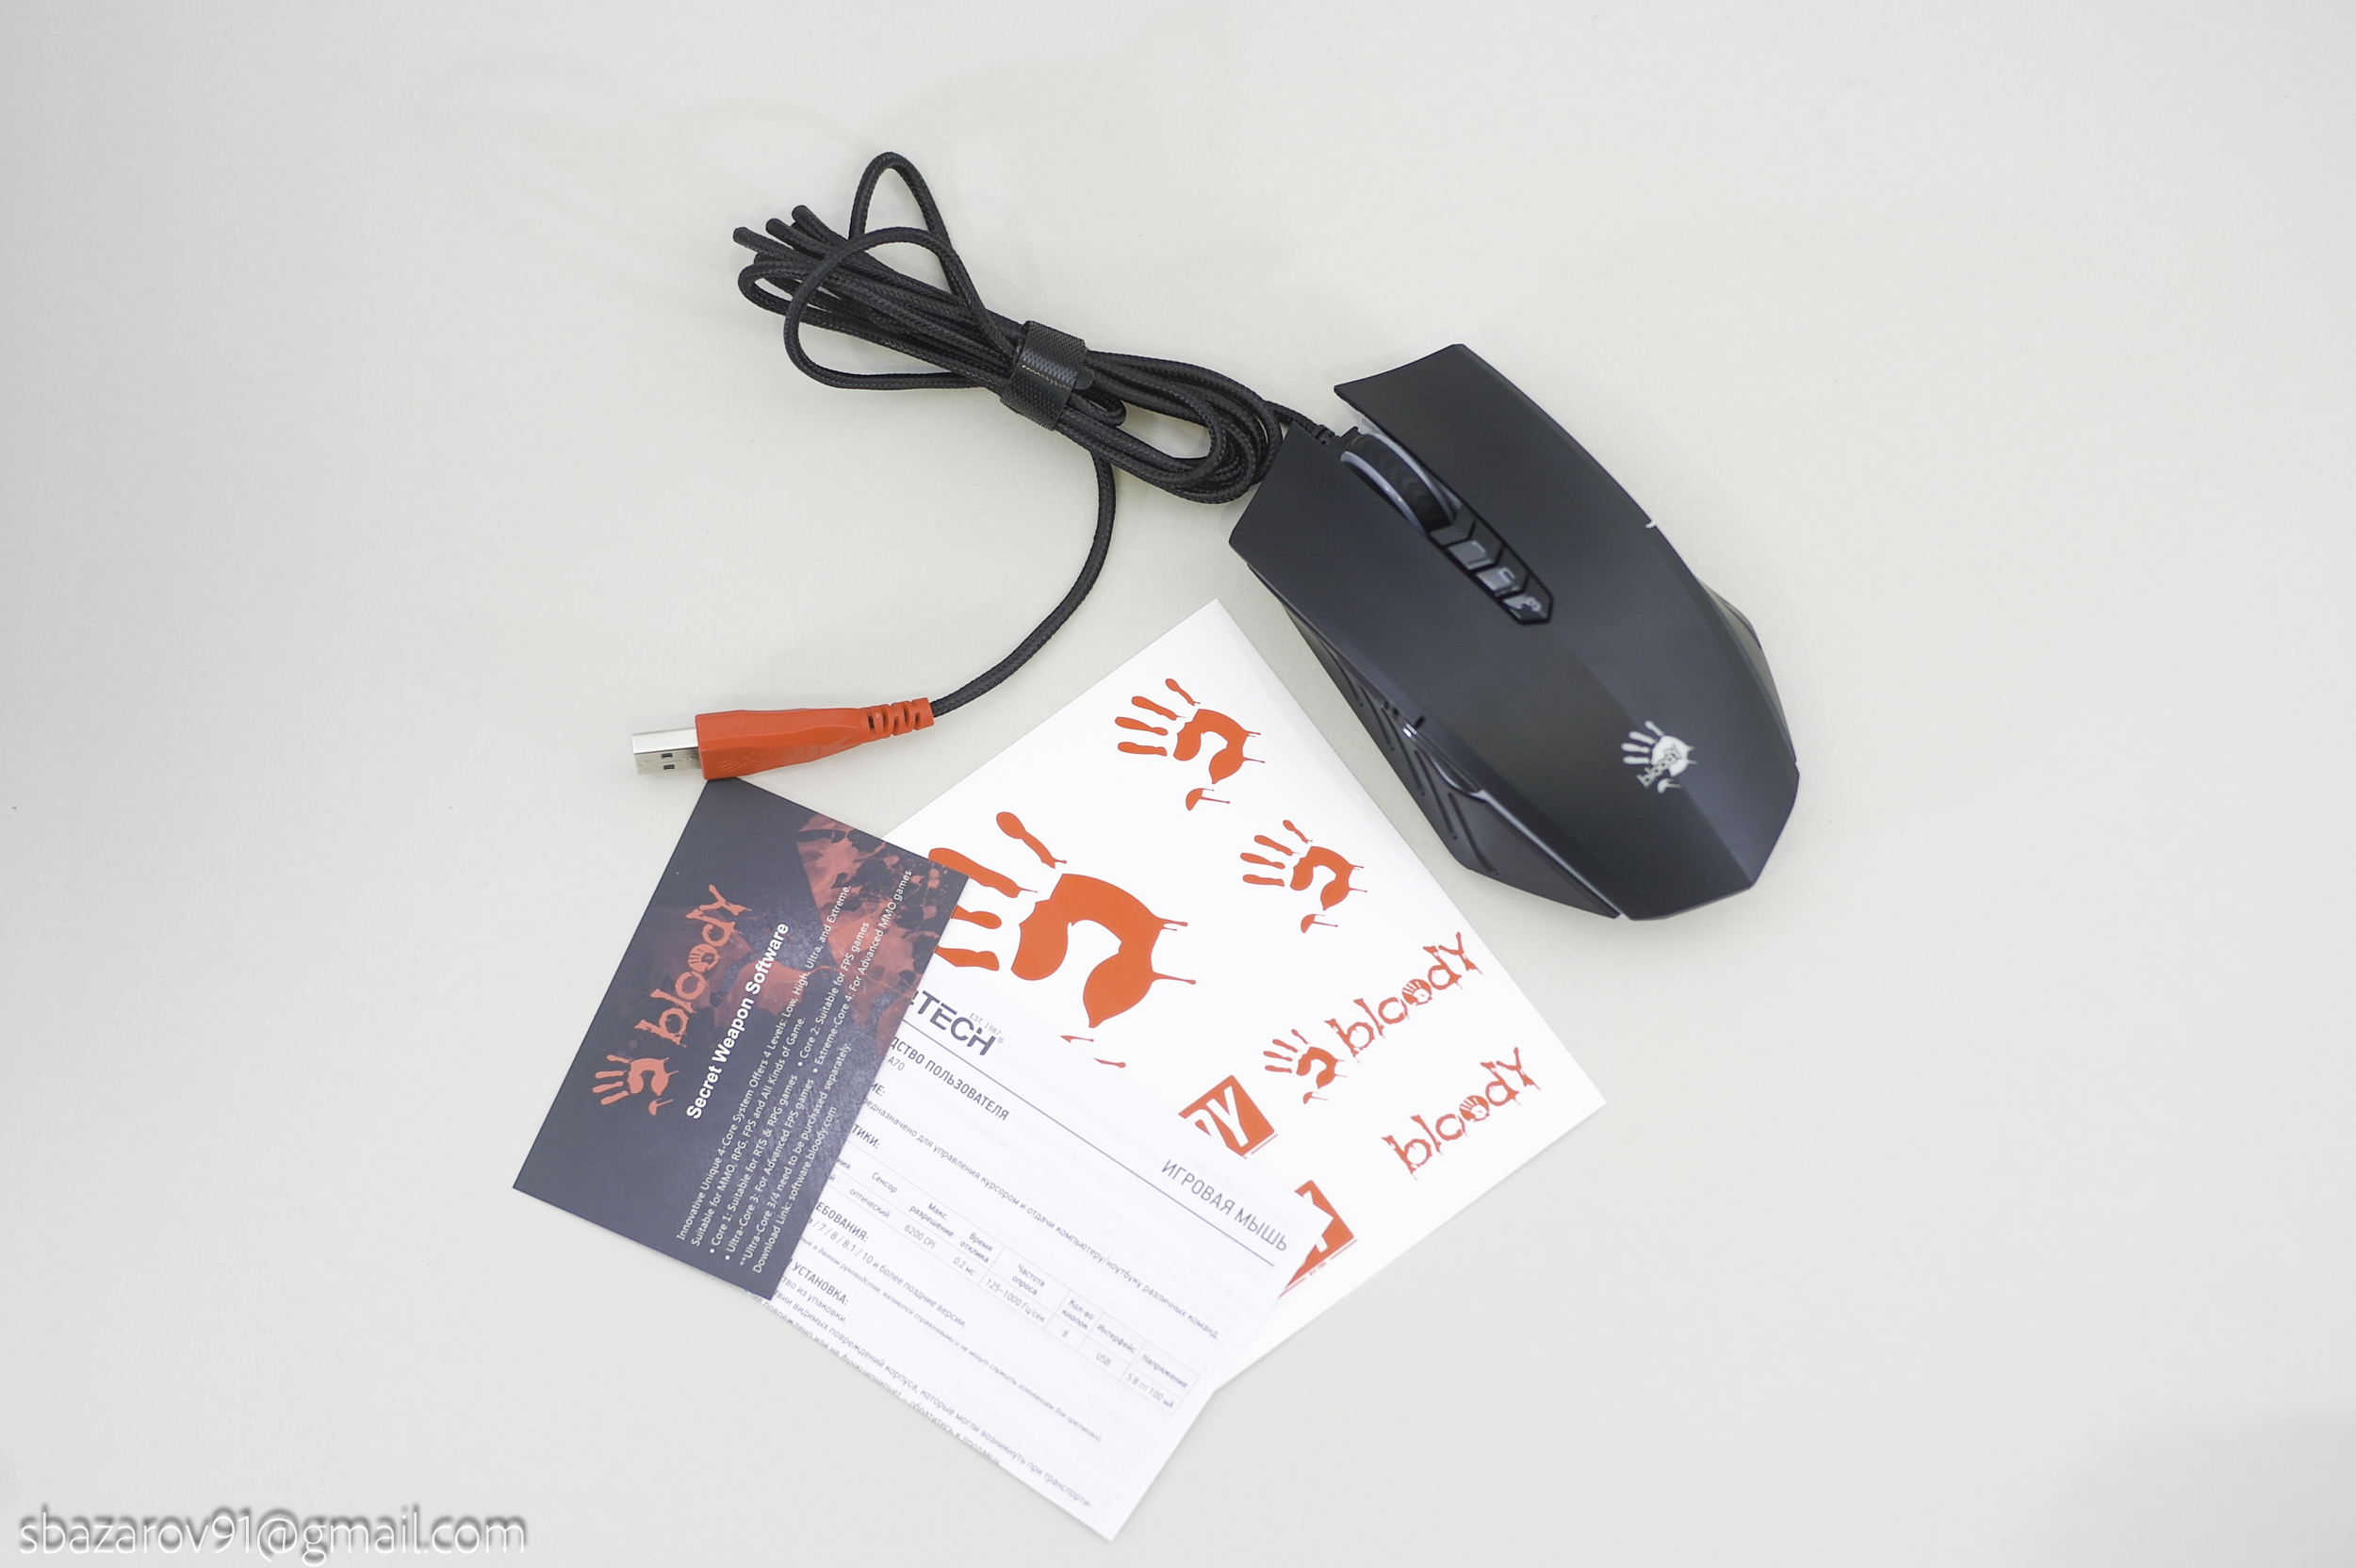 Rust disconnected eac blacklisted device bloody mouse a4tech фото 101